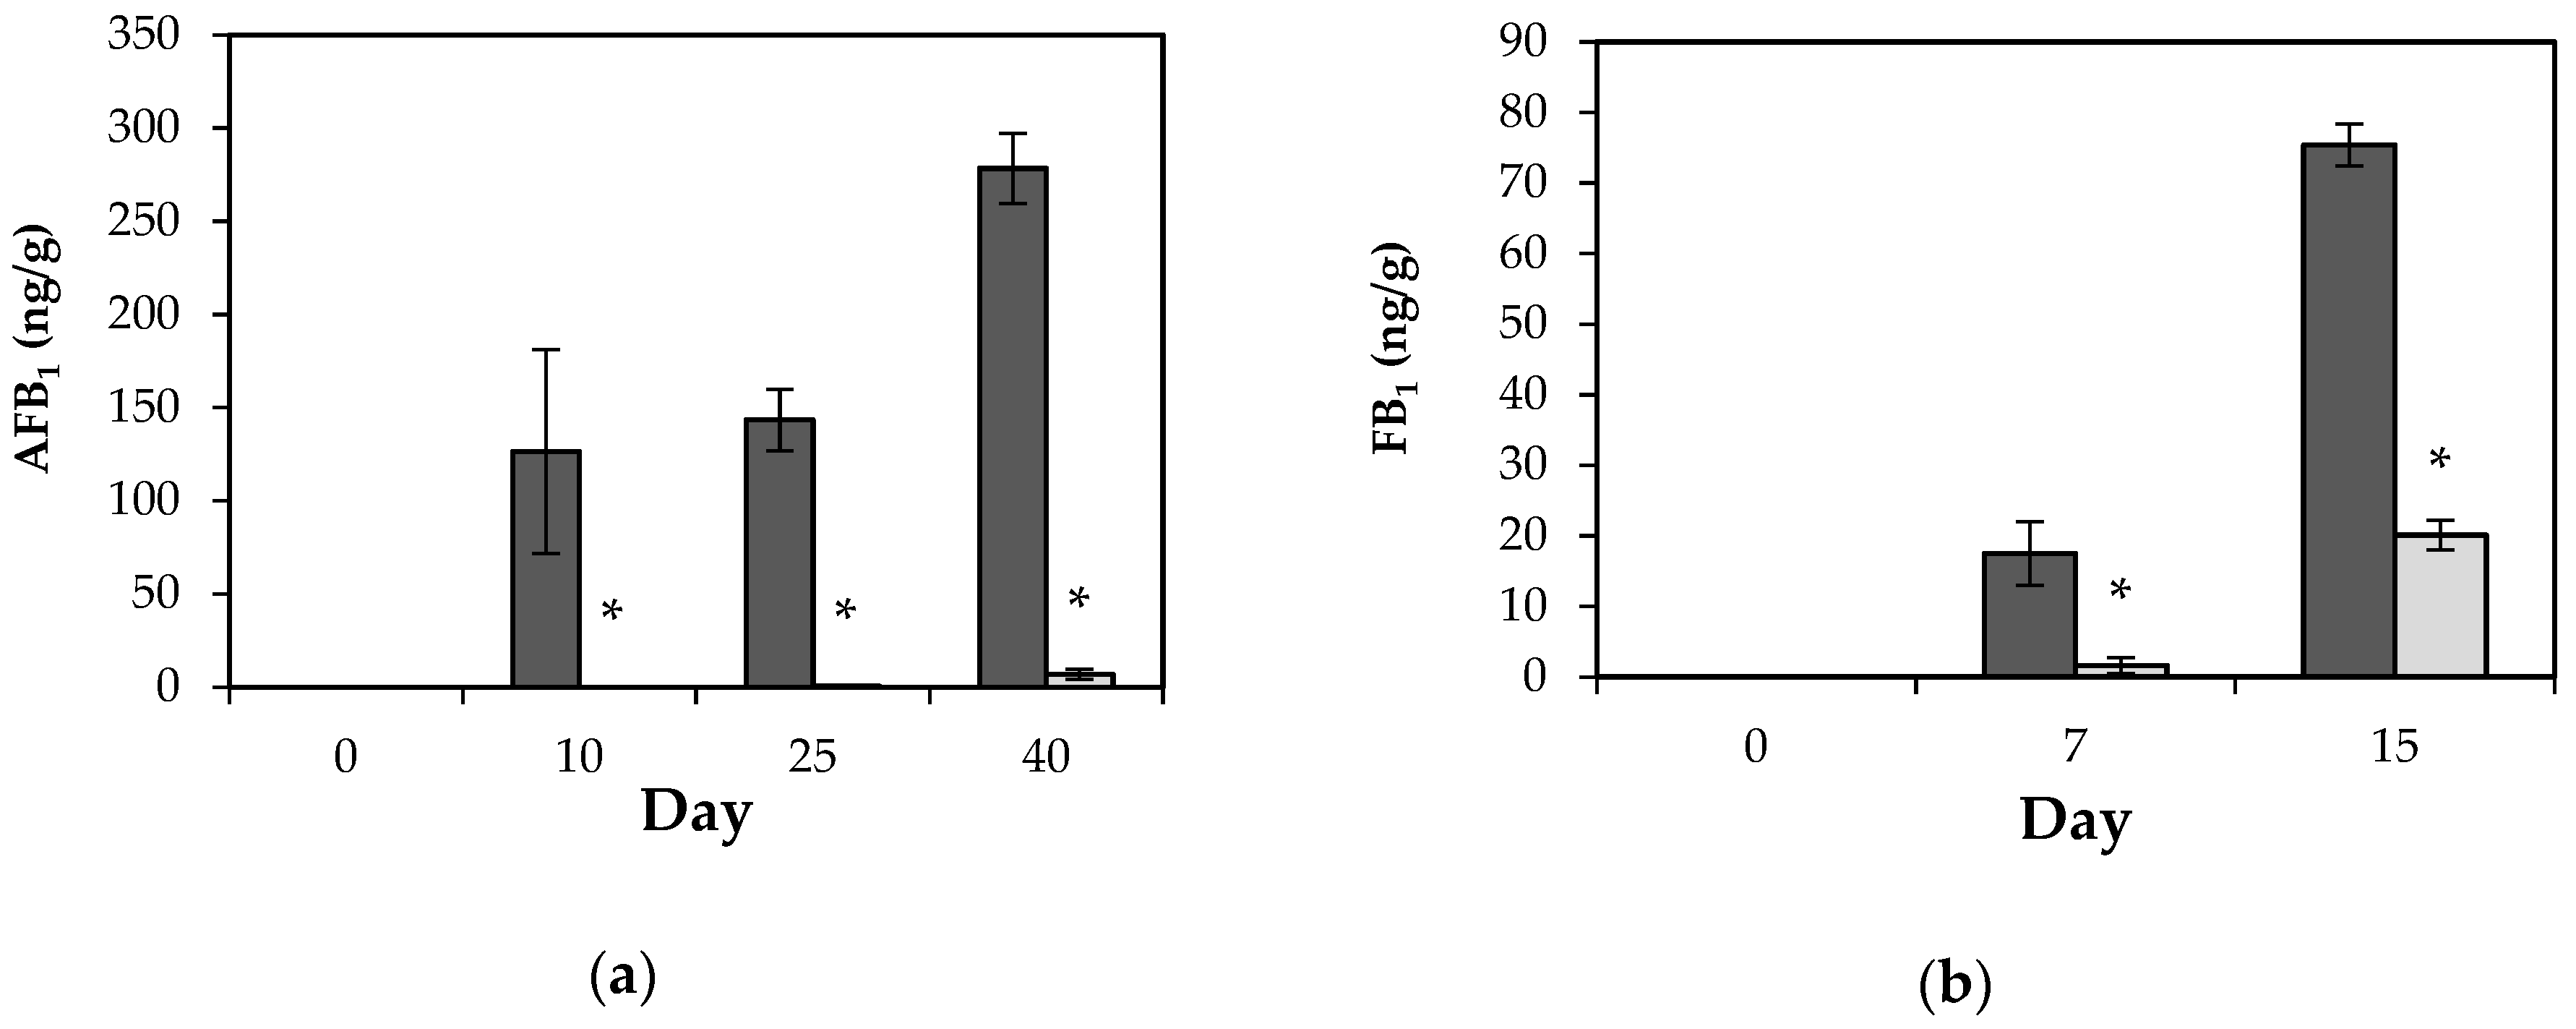 Toxins Free Full Text Potential Application Of Lactic Acid Bacteria To Reduce Aflatoxin B1 And Fumonisin B1 Occurrence On Corn Kernels And Corn Ears Html